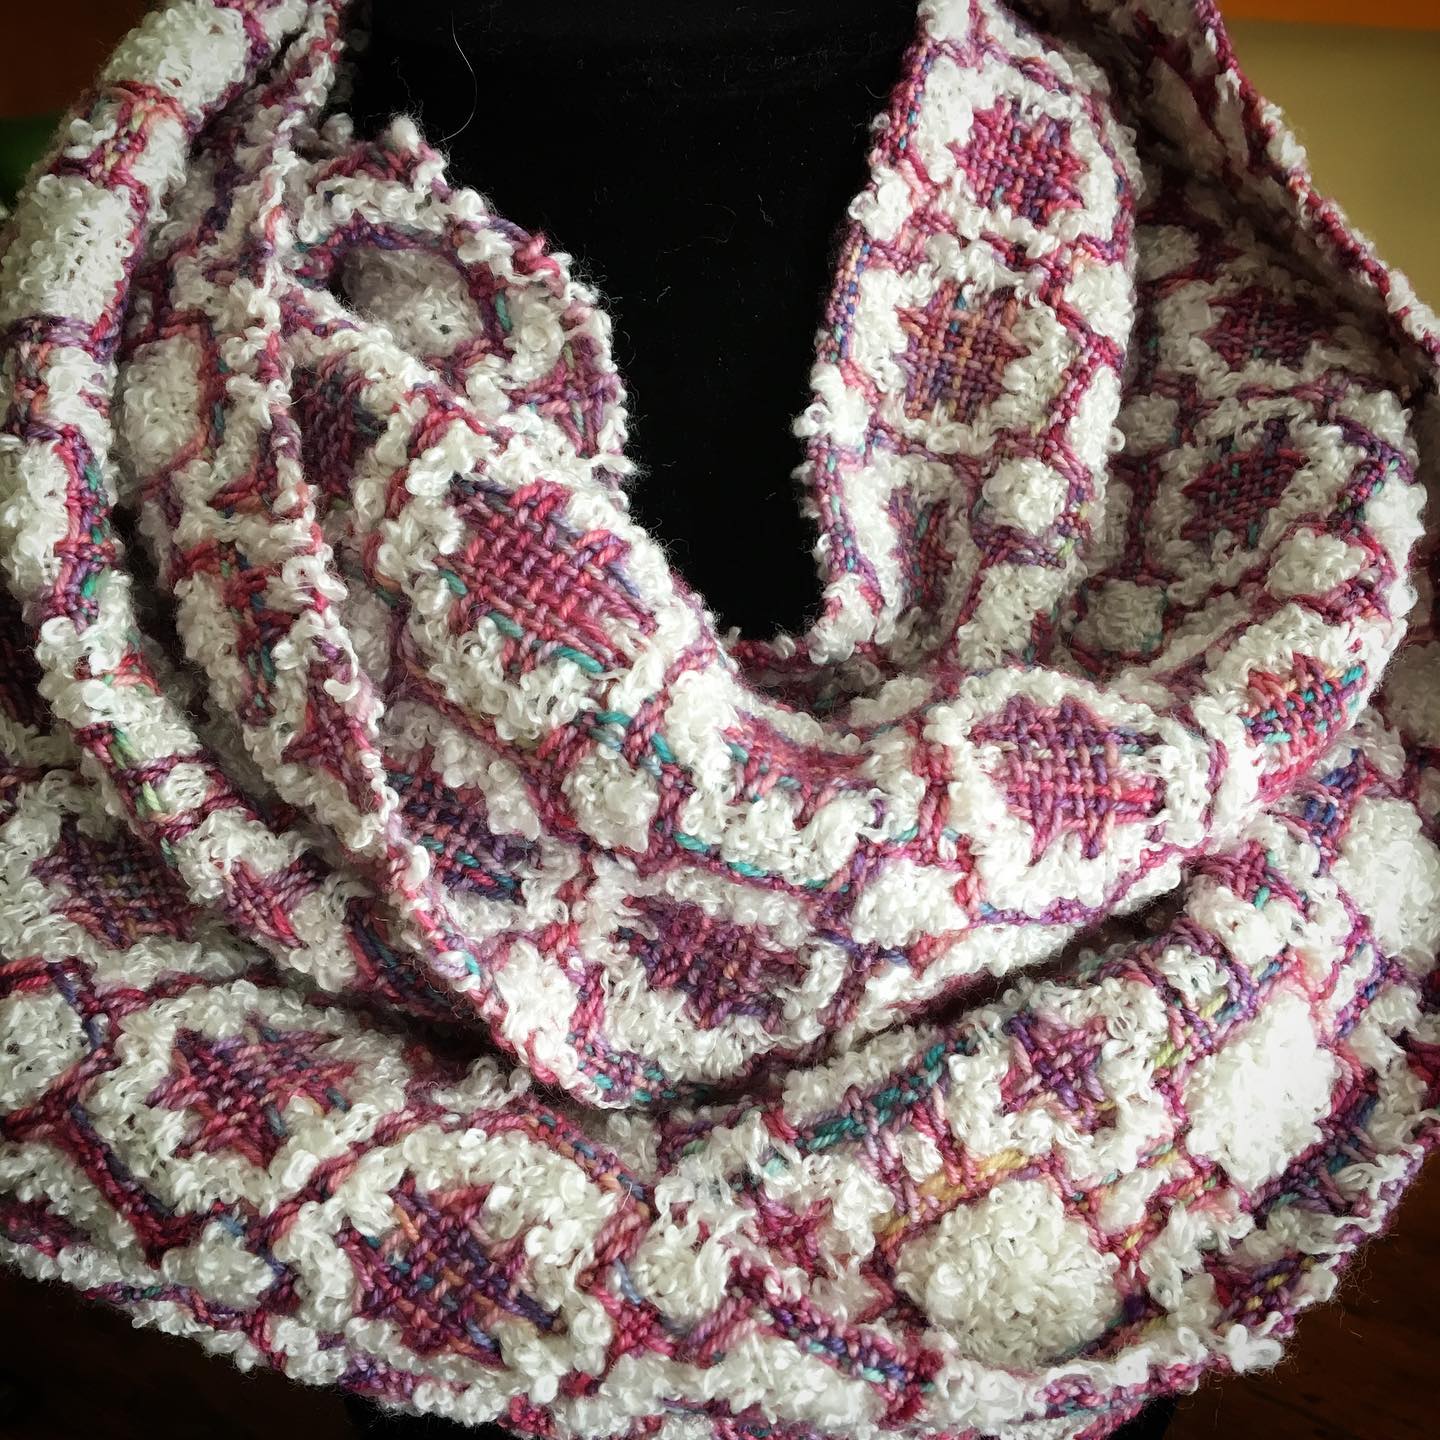 A woven scarf with hues of white, pink and purple wrapped around a dress form